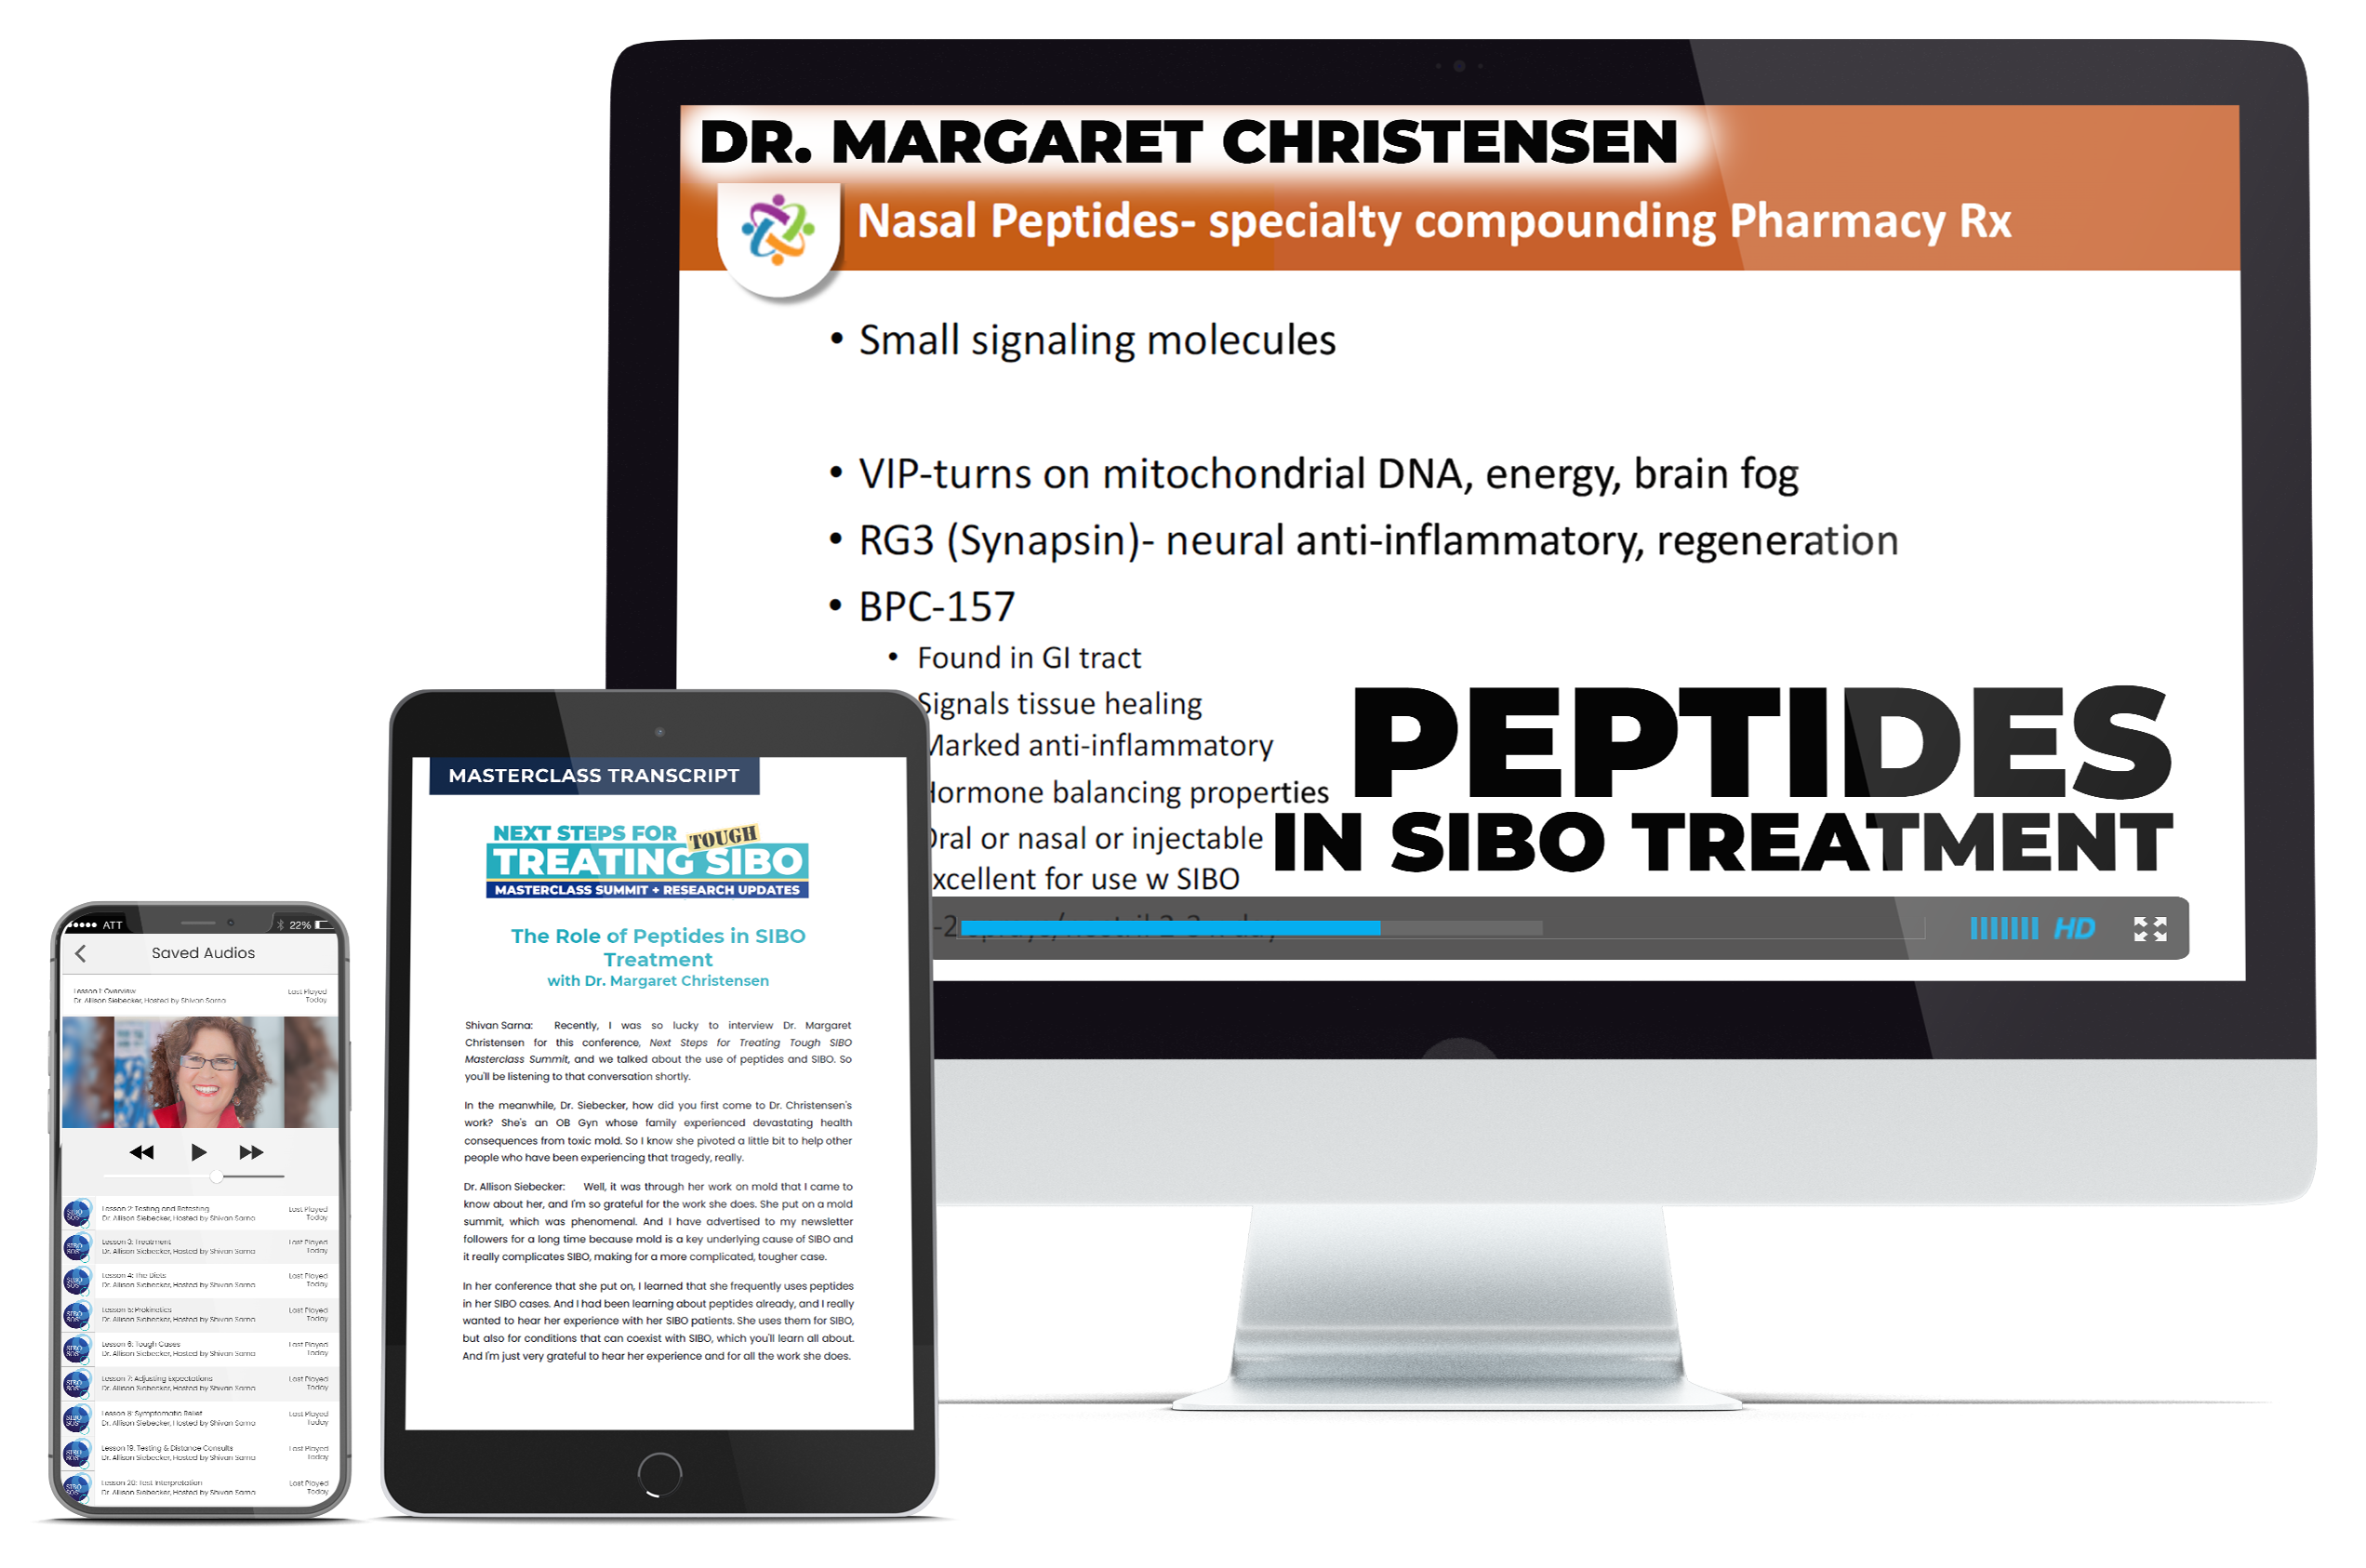 The Role of Peptides in SIBO Treatment​​ with Dr. Margaret Christensen